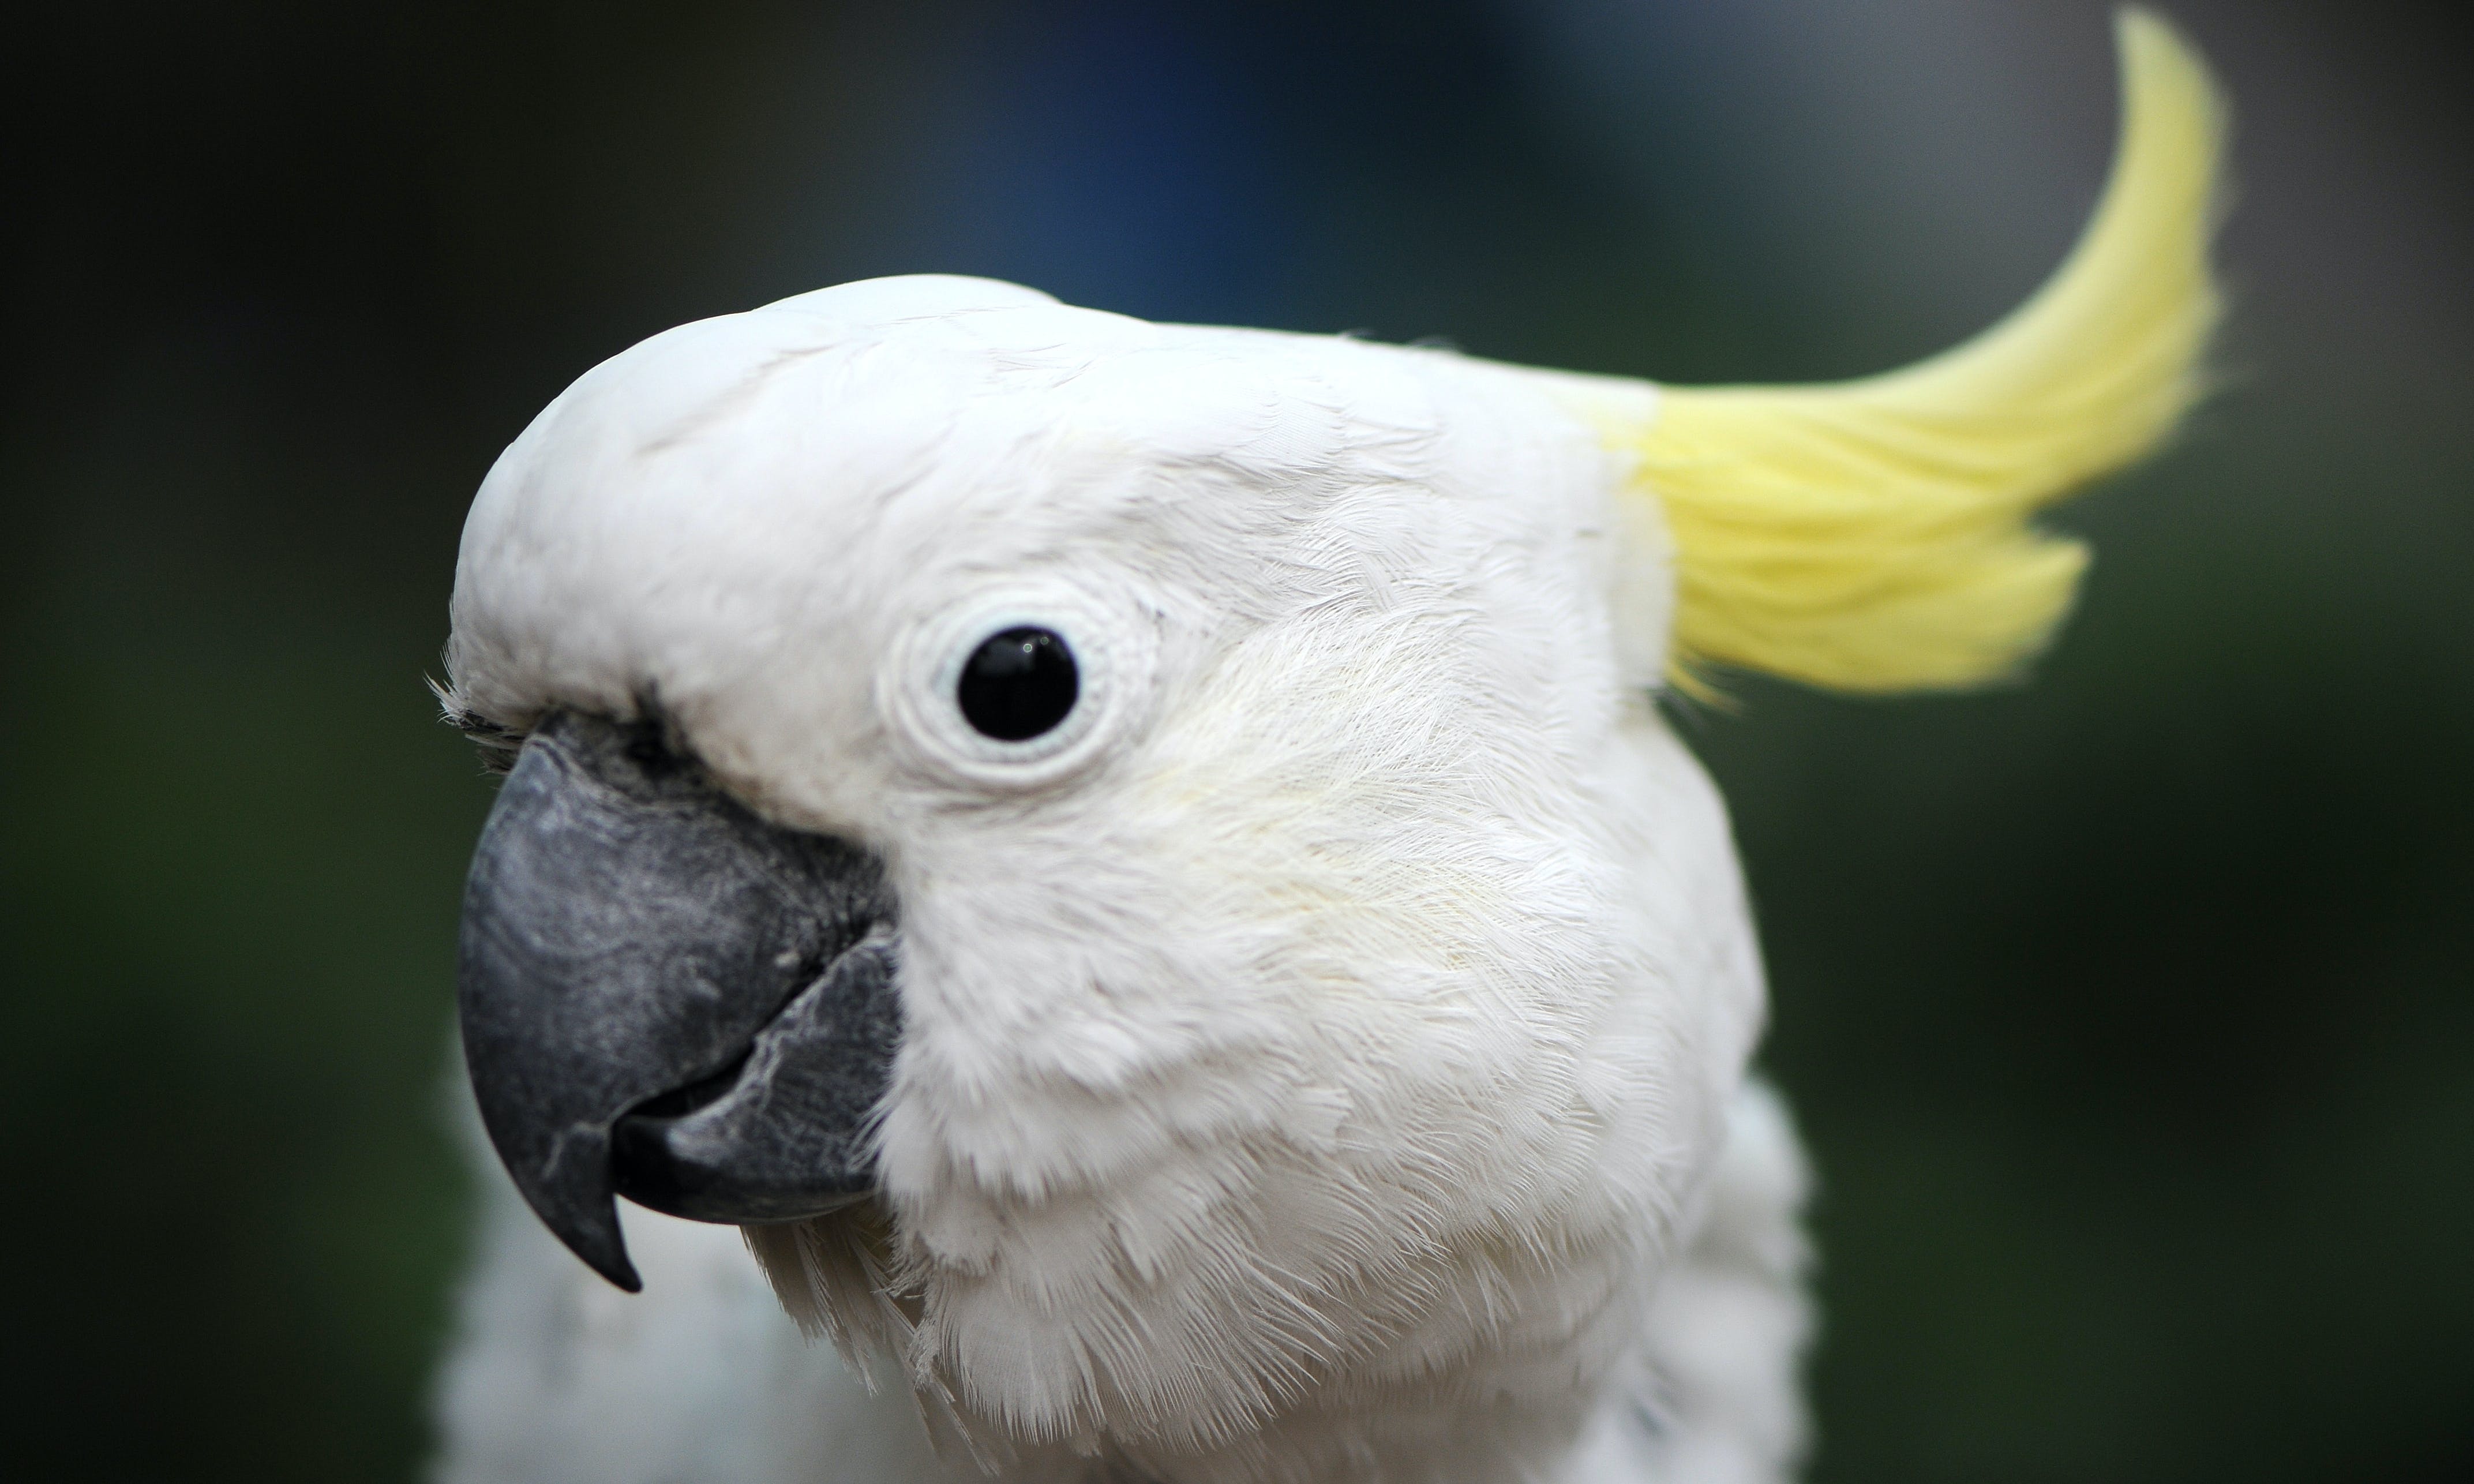 INDONESIA: What Happens to Pet Cockatoos Confiscated From Smugglers?